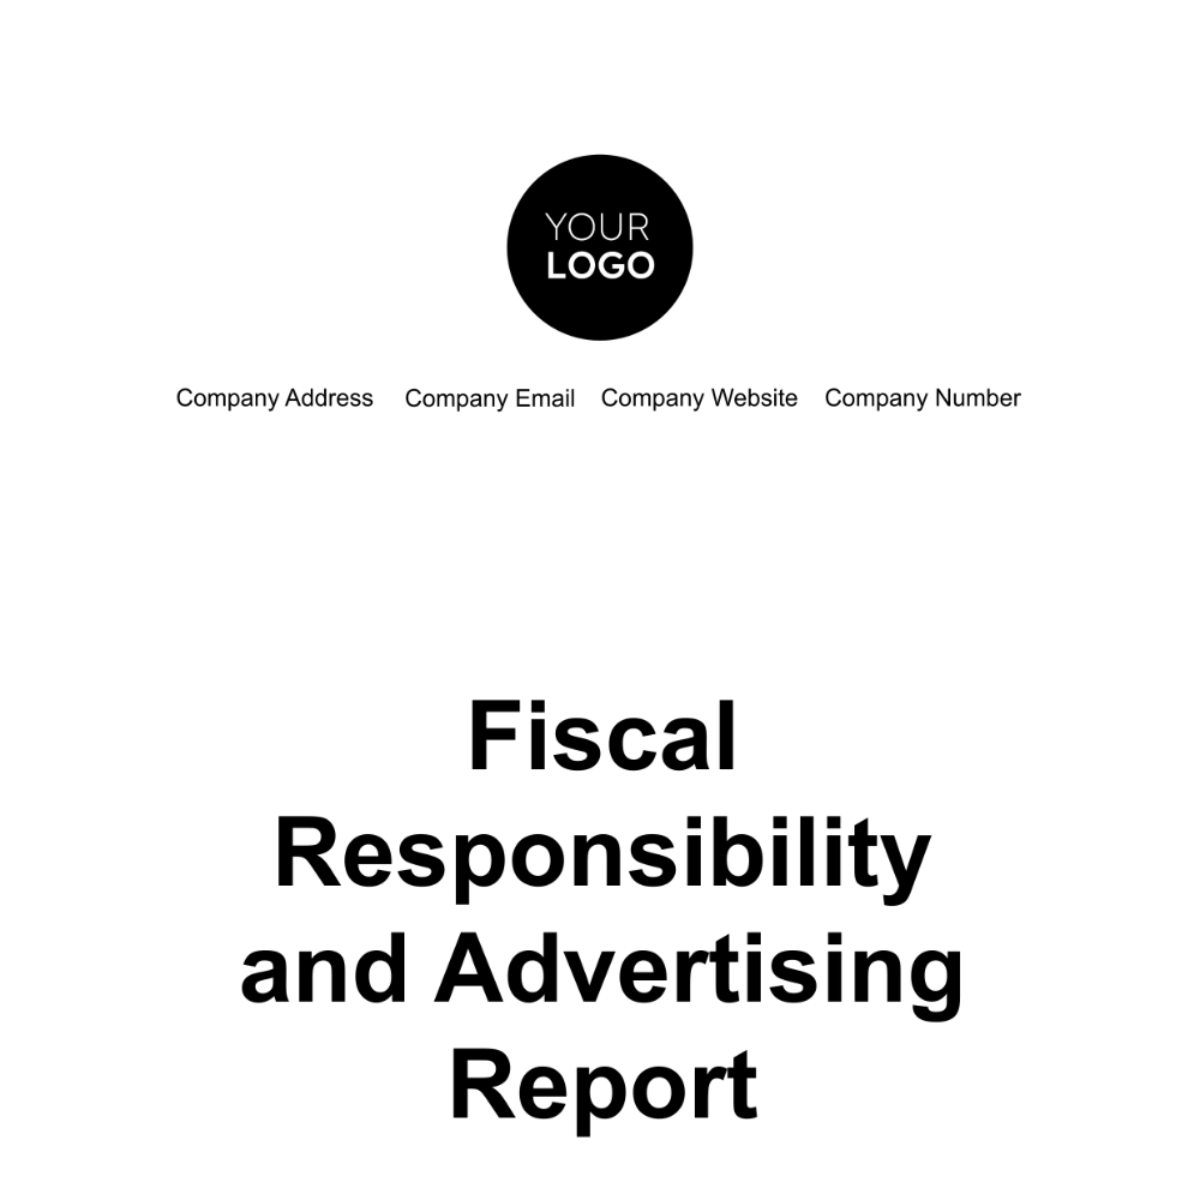 Fiscal Responsibility and Advertising Report Template